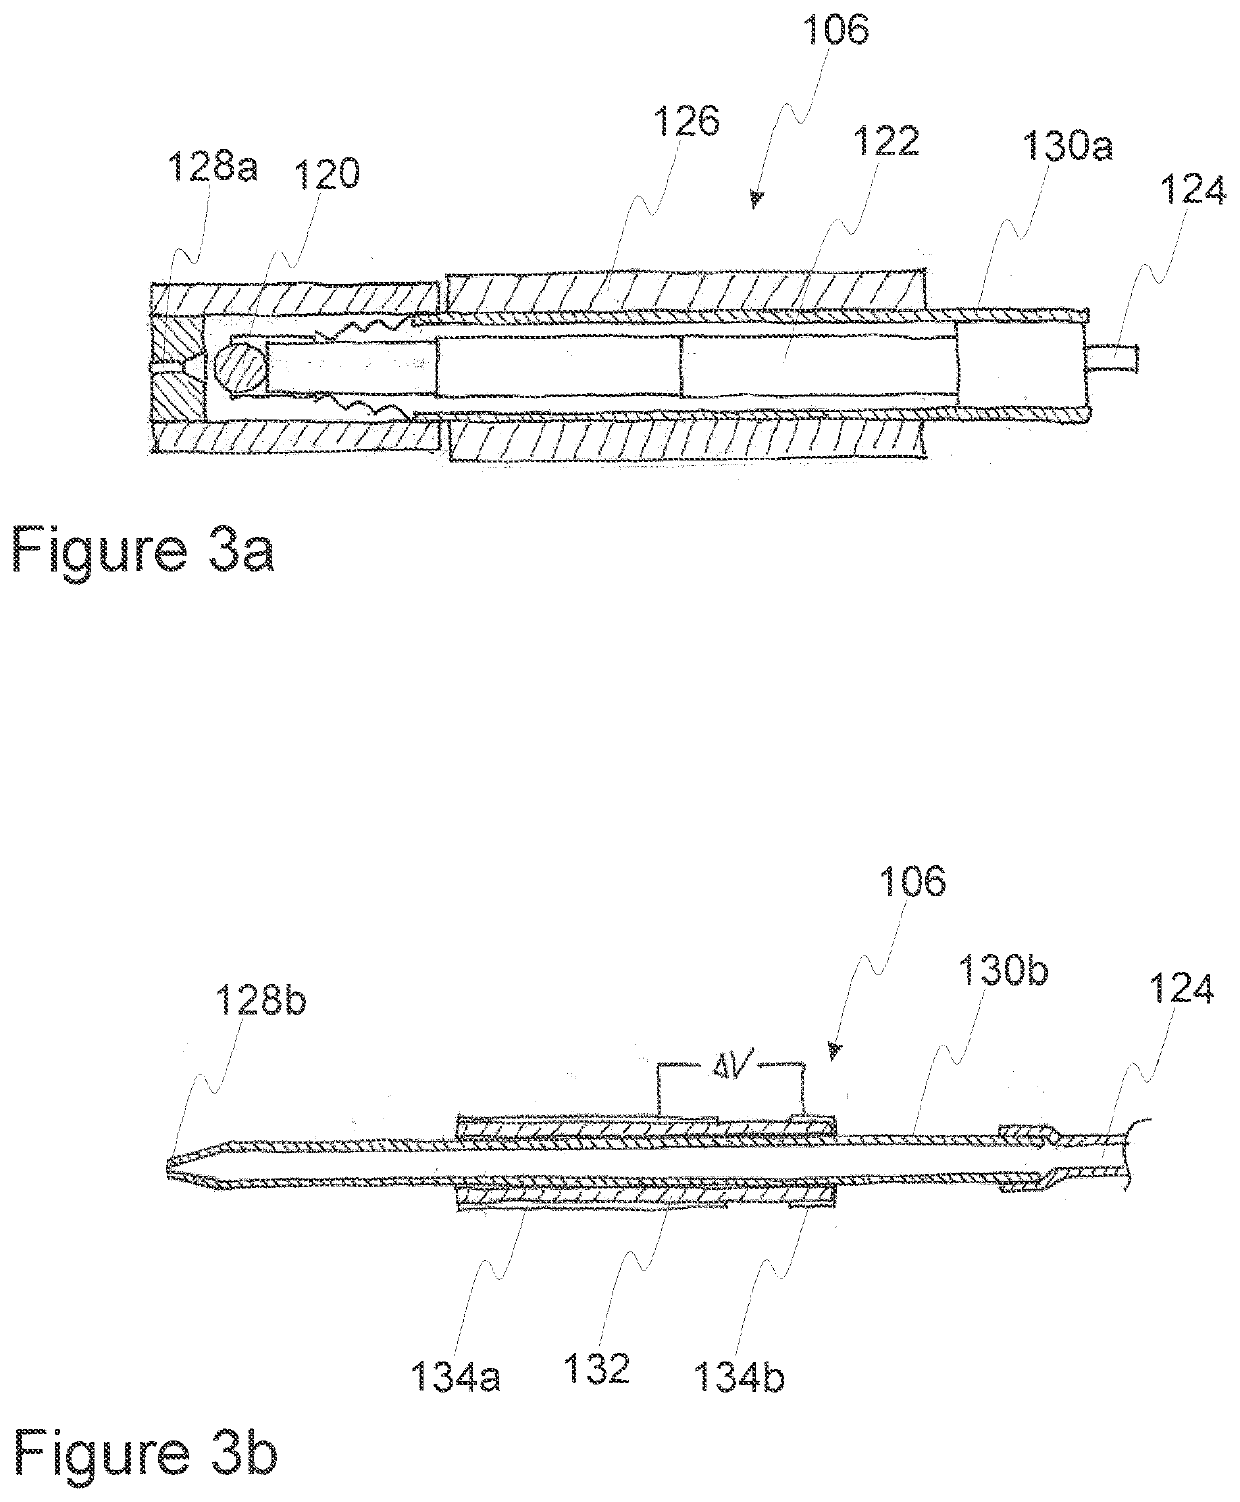 Device for an ocular tonometer, and arrangement, method and uses thereof